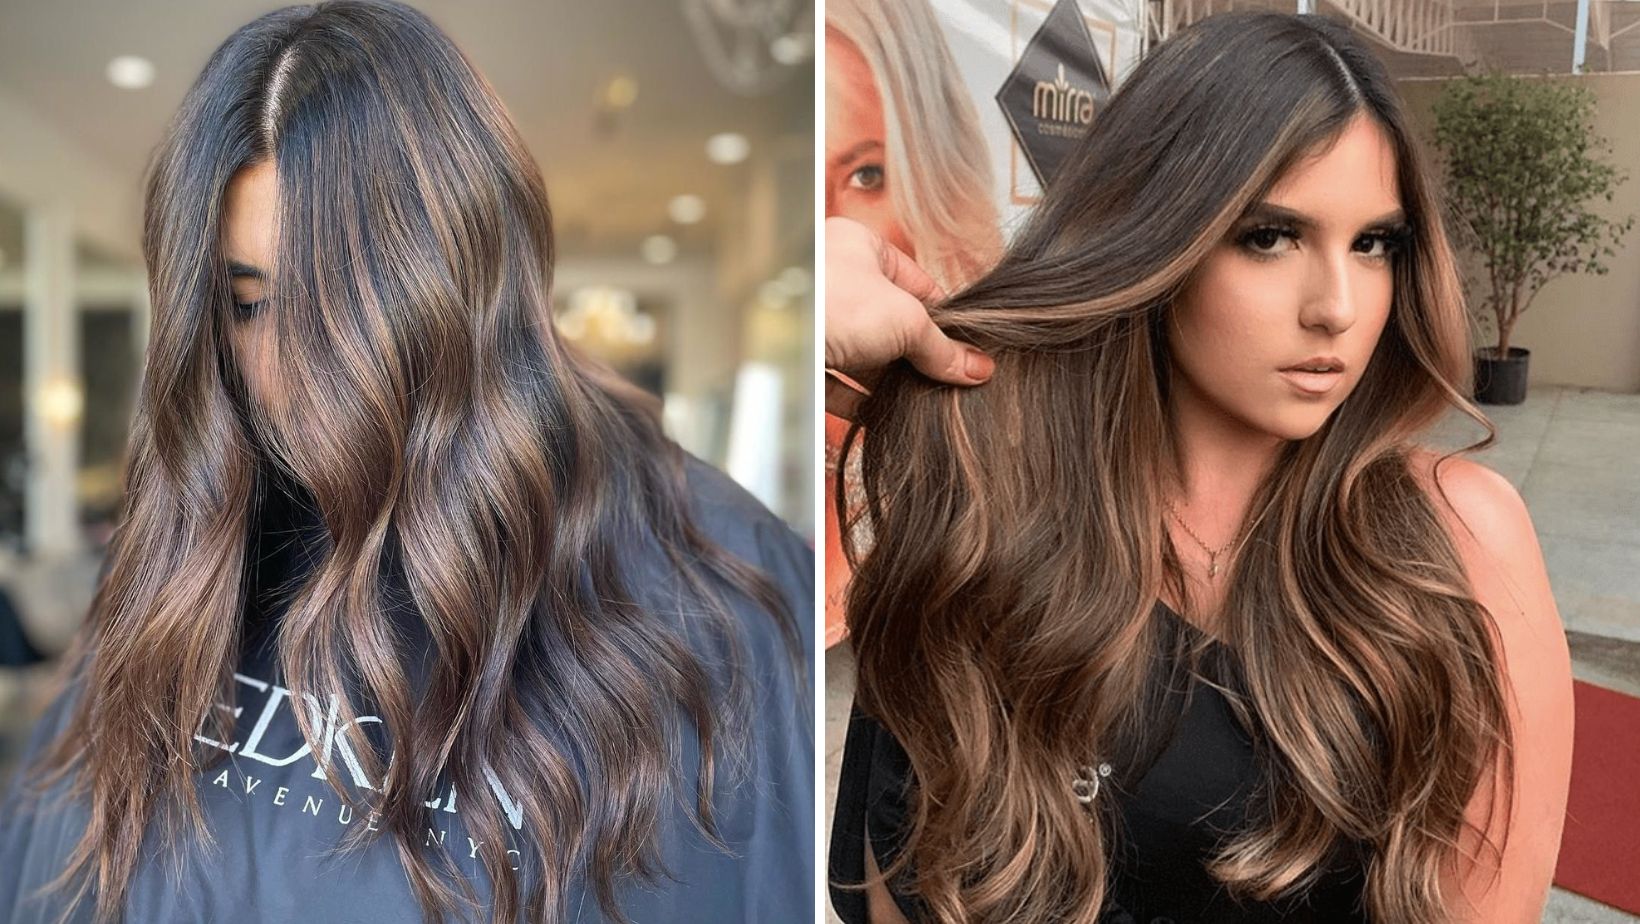 What is an Expensive Brunette Hair Trend, aka Rich Brunette?